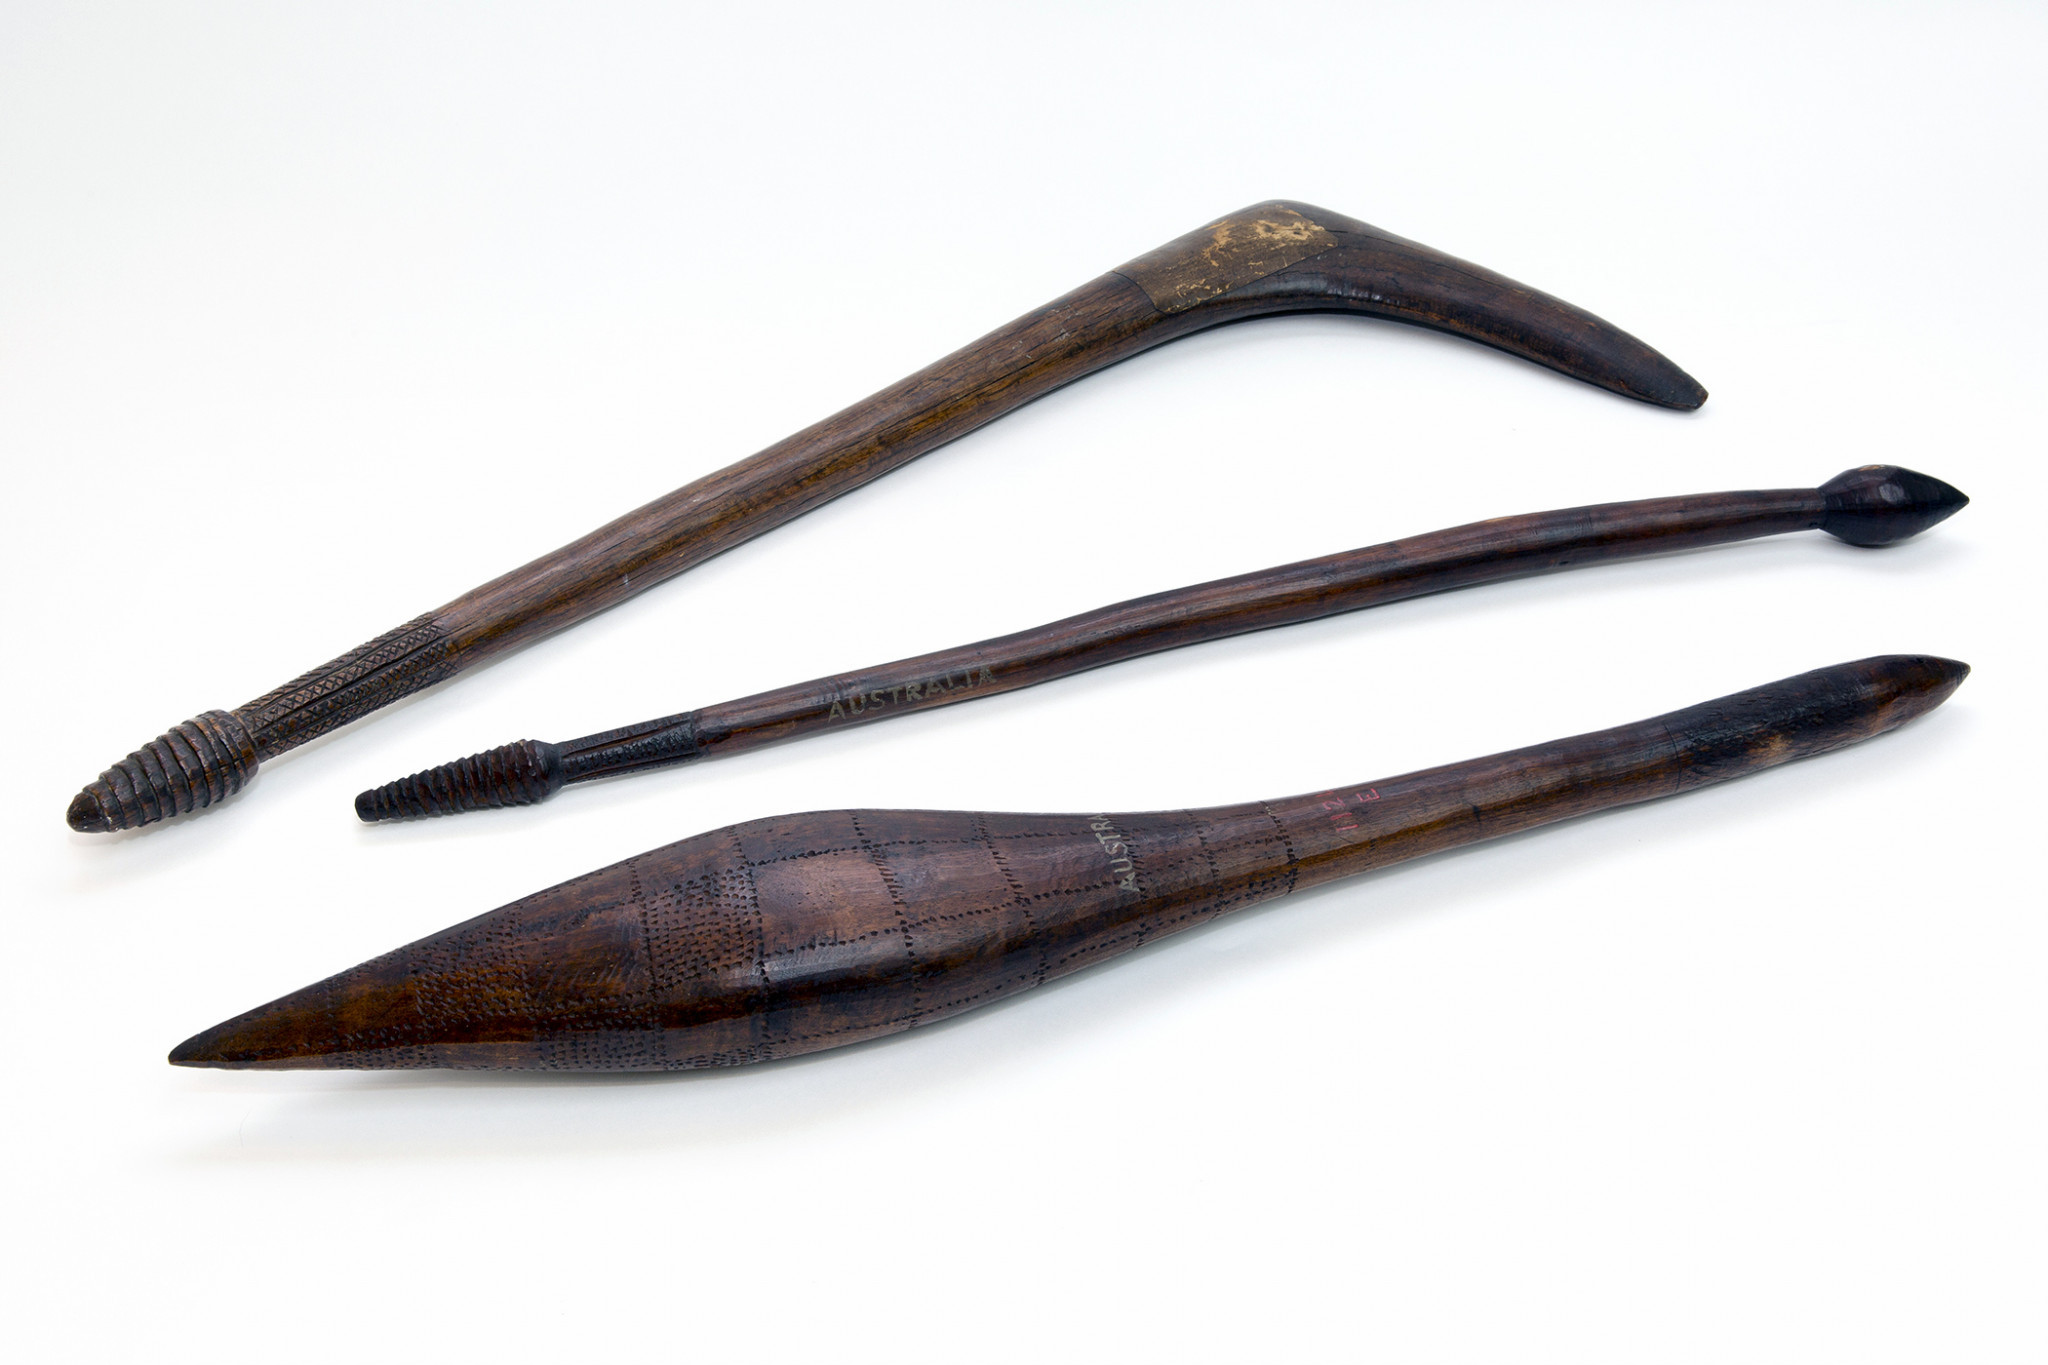 Aboriginal implements used during the cricket tour to England in 1868 ©MCC